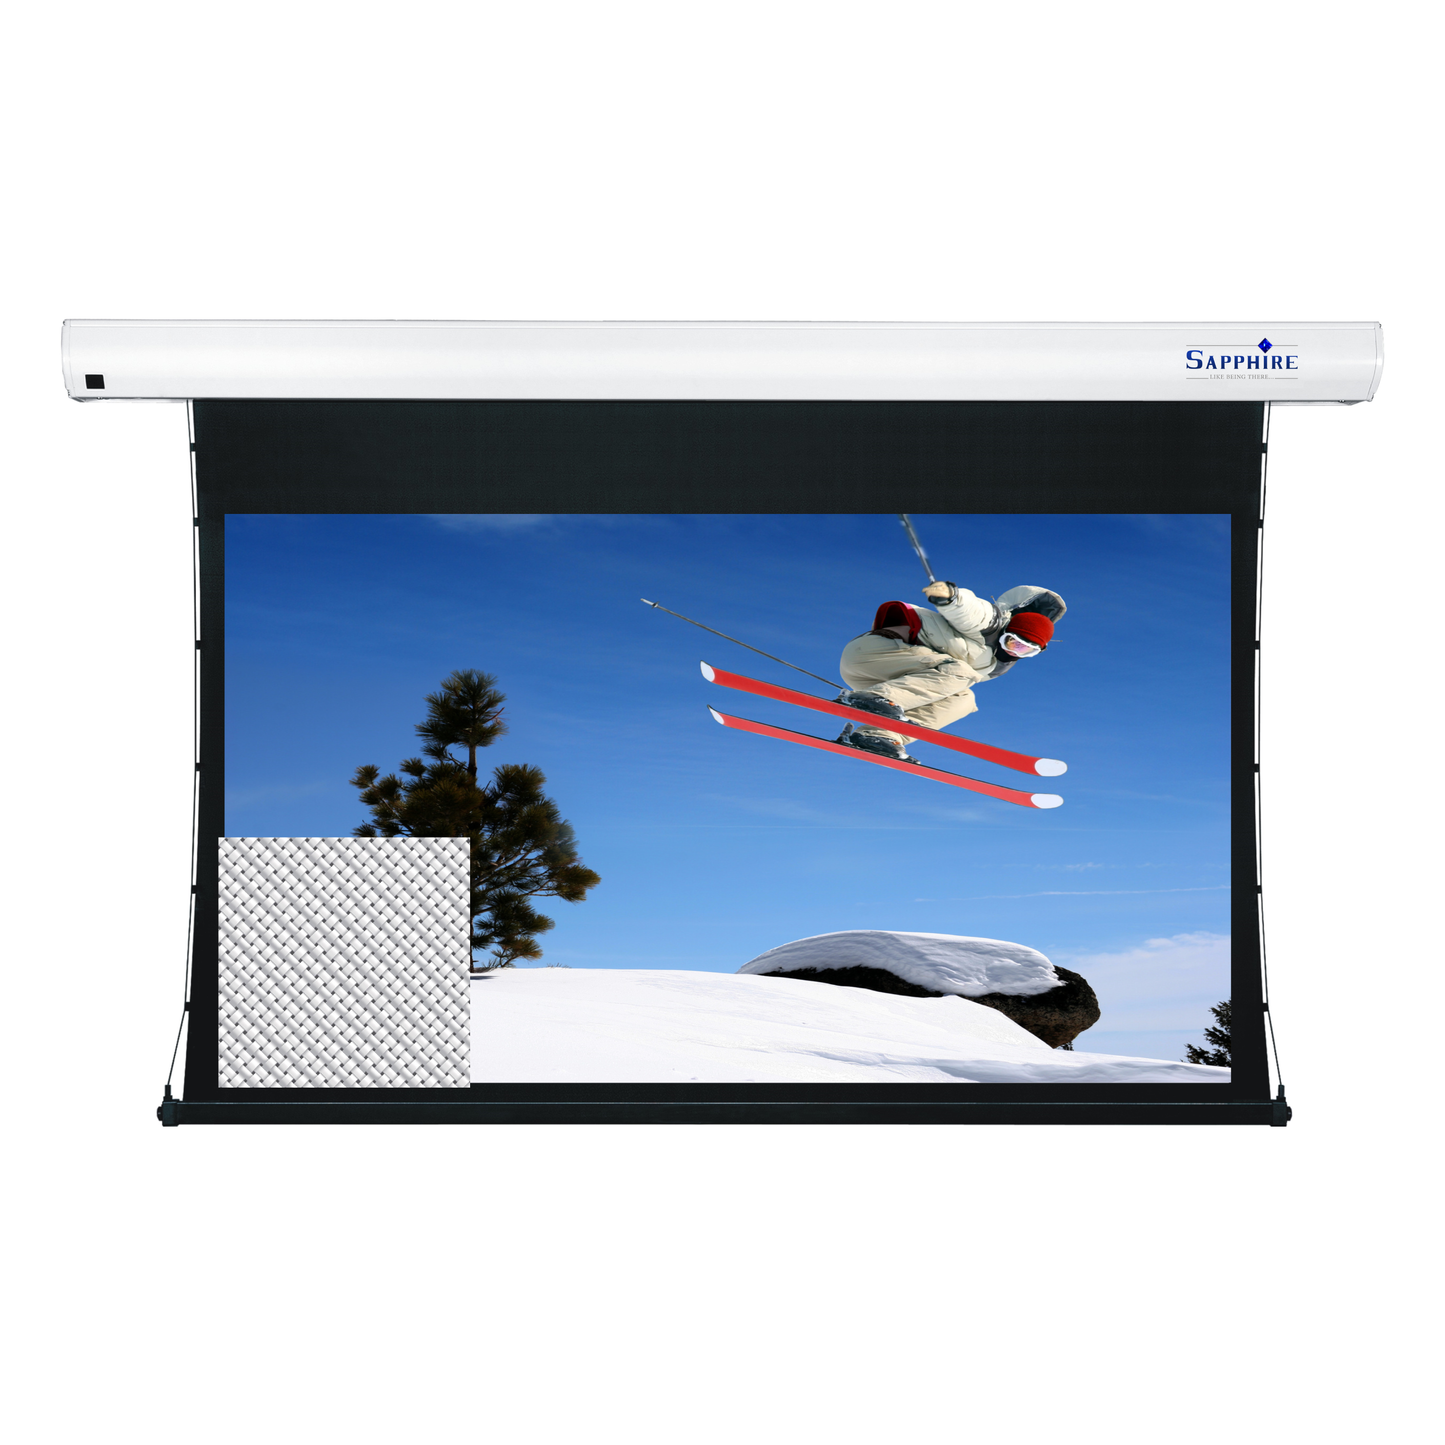 Sapphire Tab Tension Electric Screen 16:9 Format Infra Red Viewing Area 2346mm x 1320mm Woven Approx Case Dimensions L 2834mm x H 134mm x D 135mm